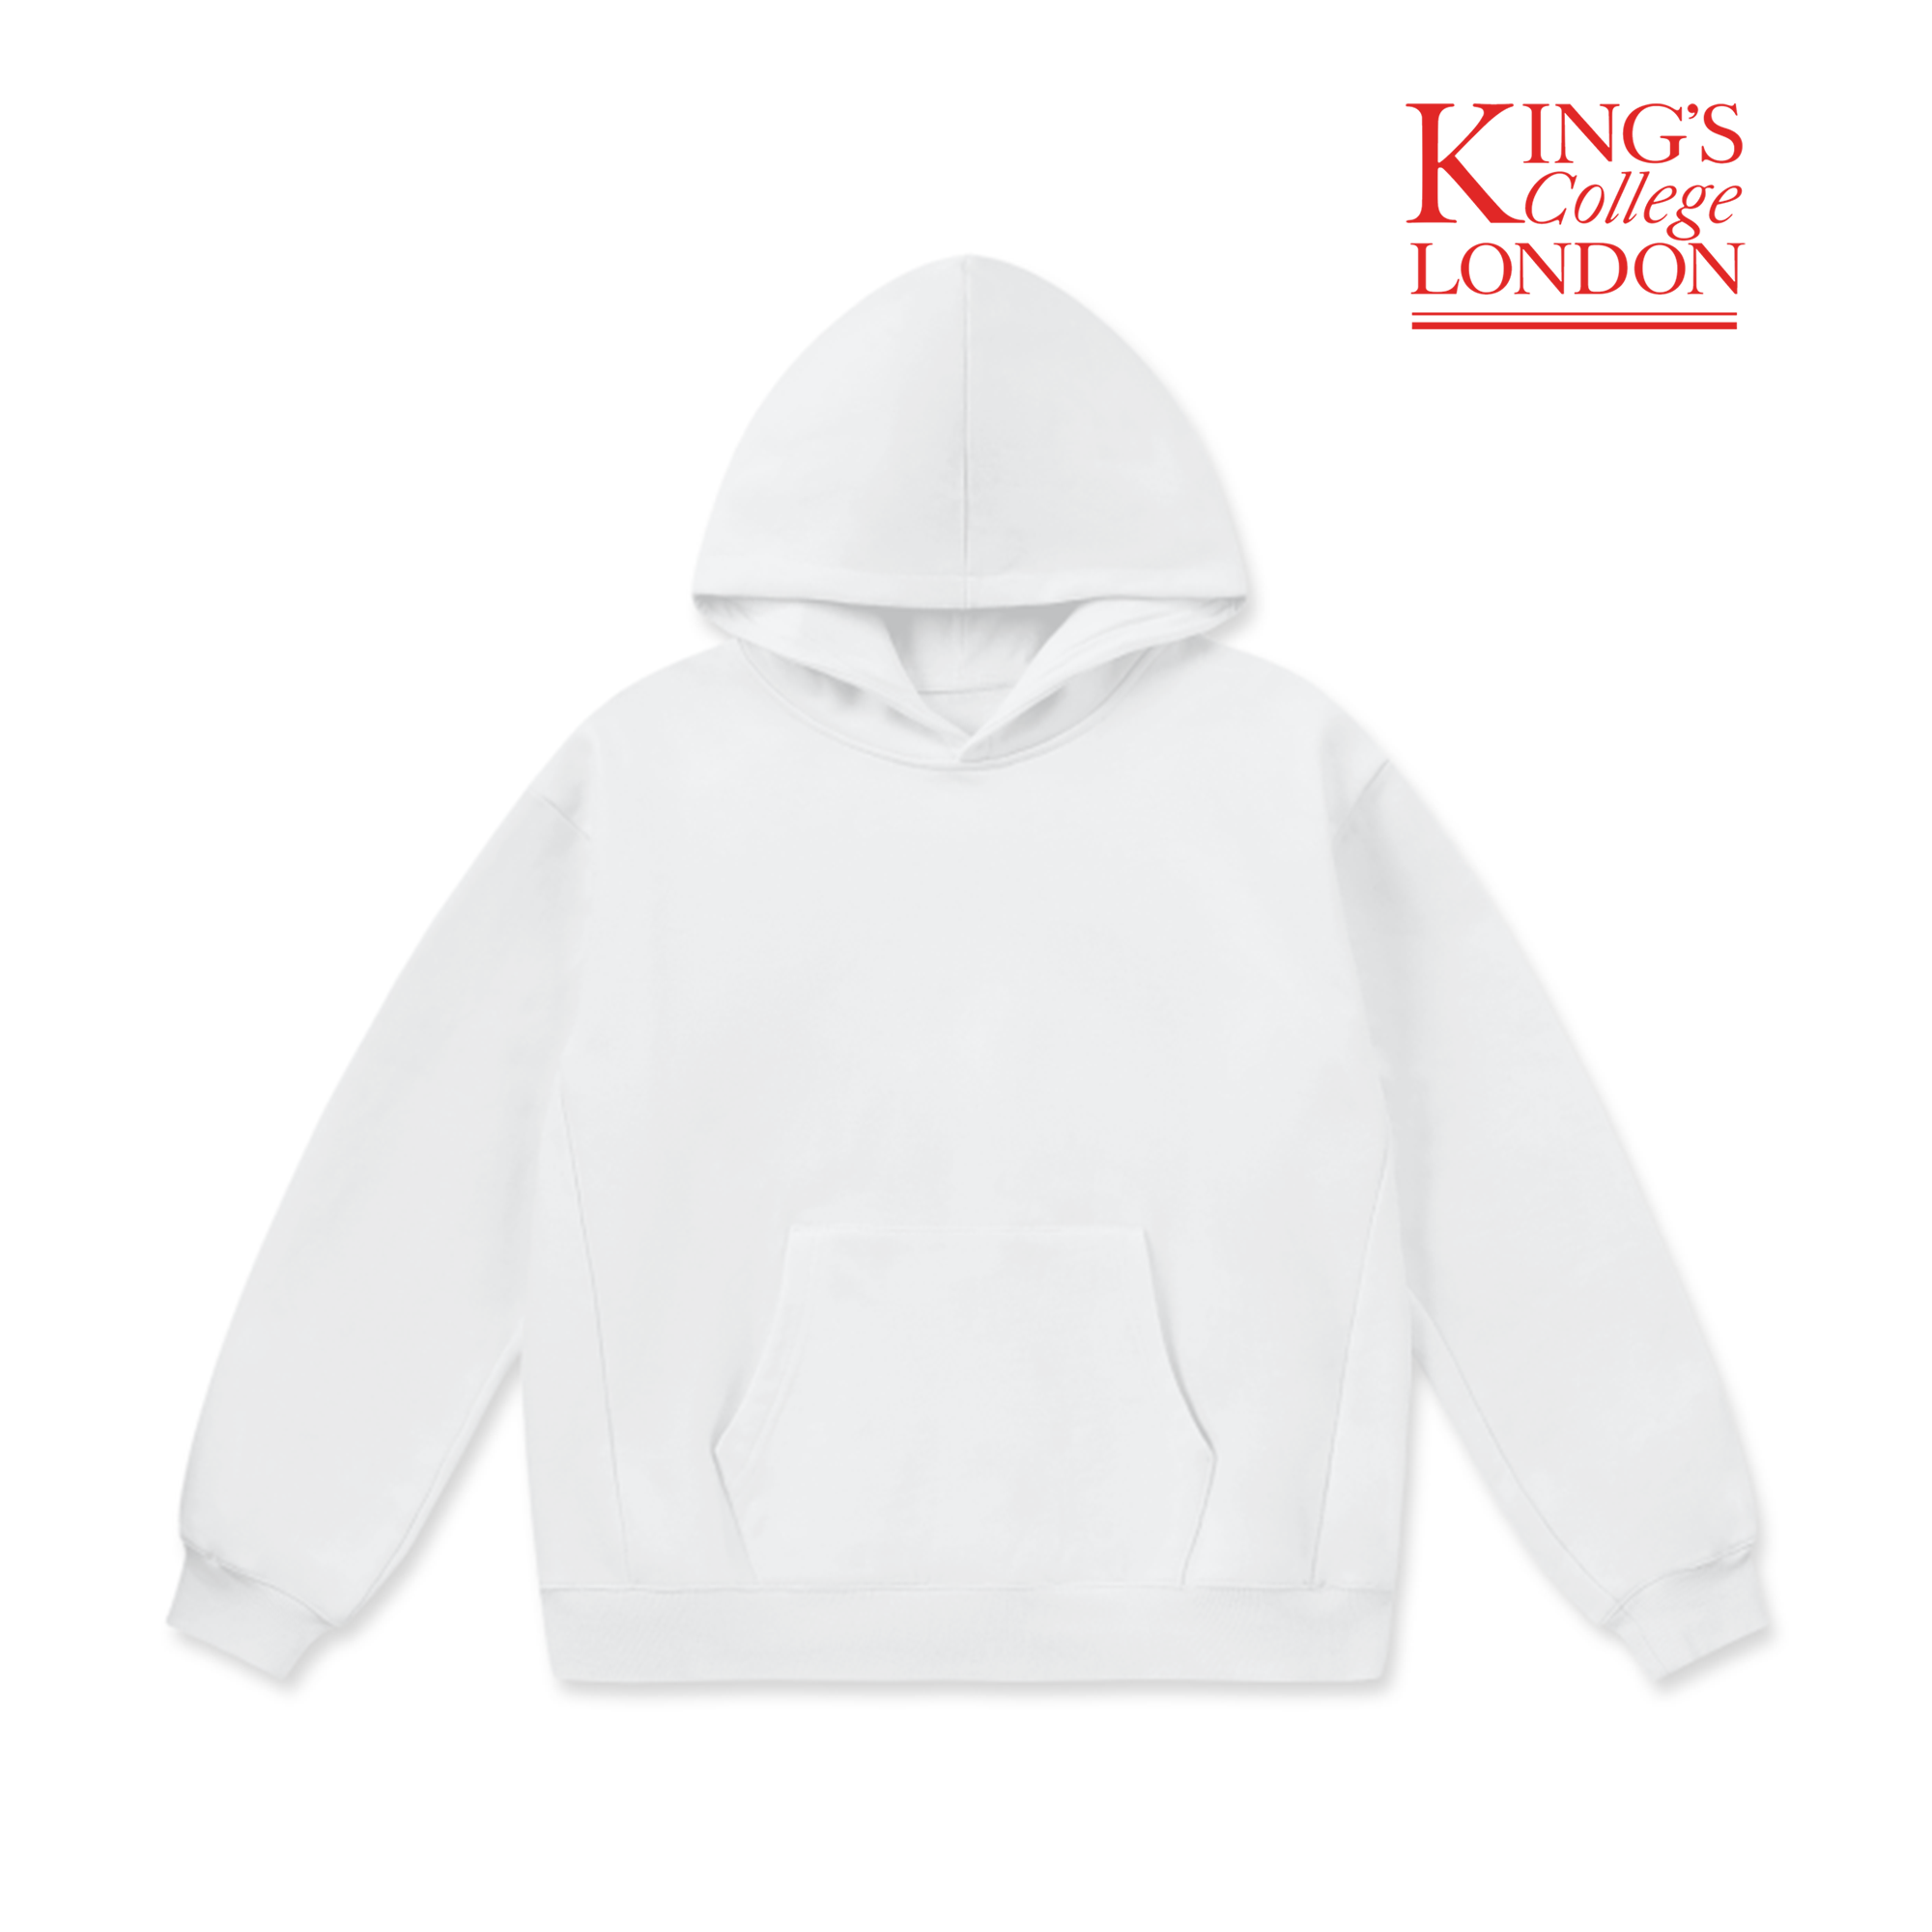 LCC Super Weighted Hoodie - King's College London (Modern)